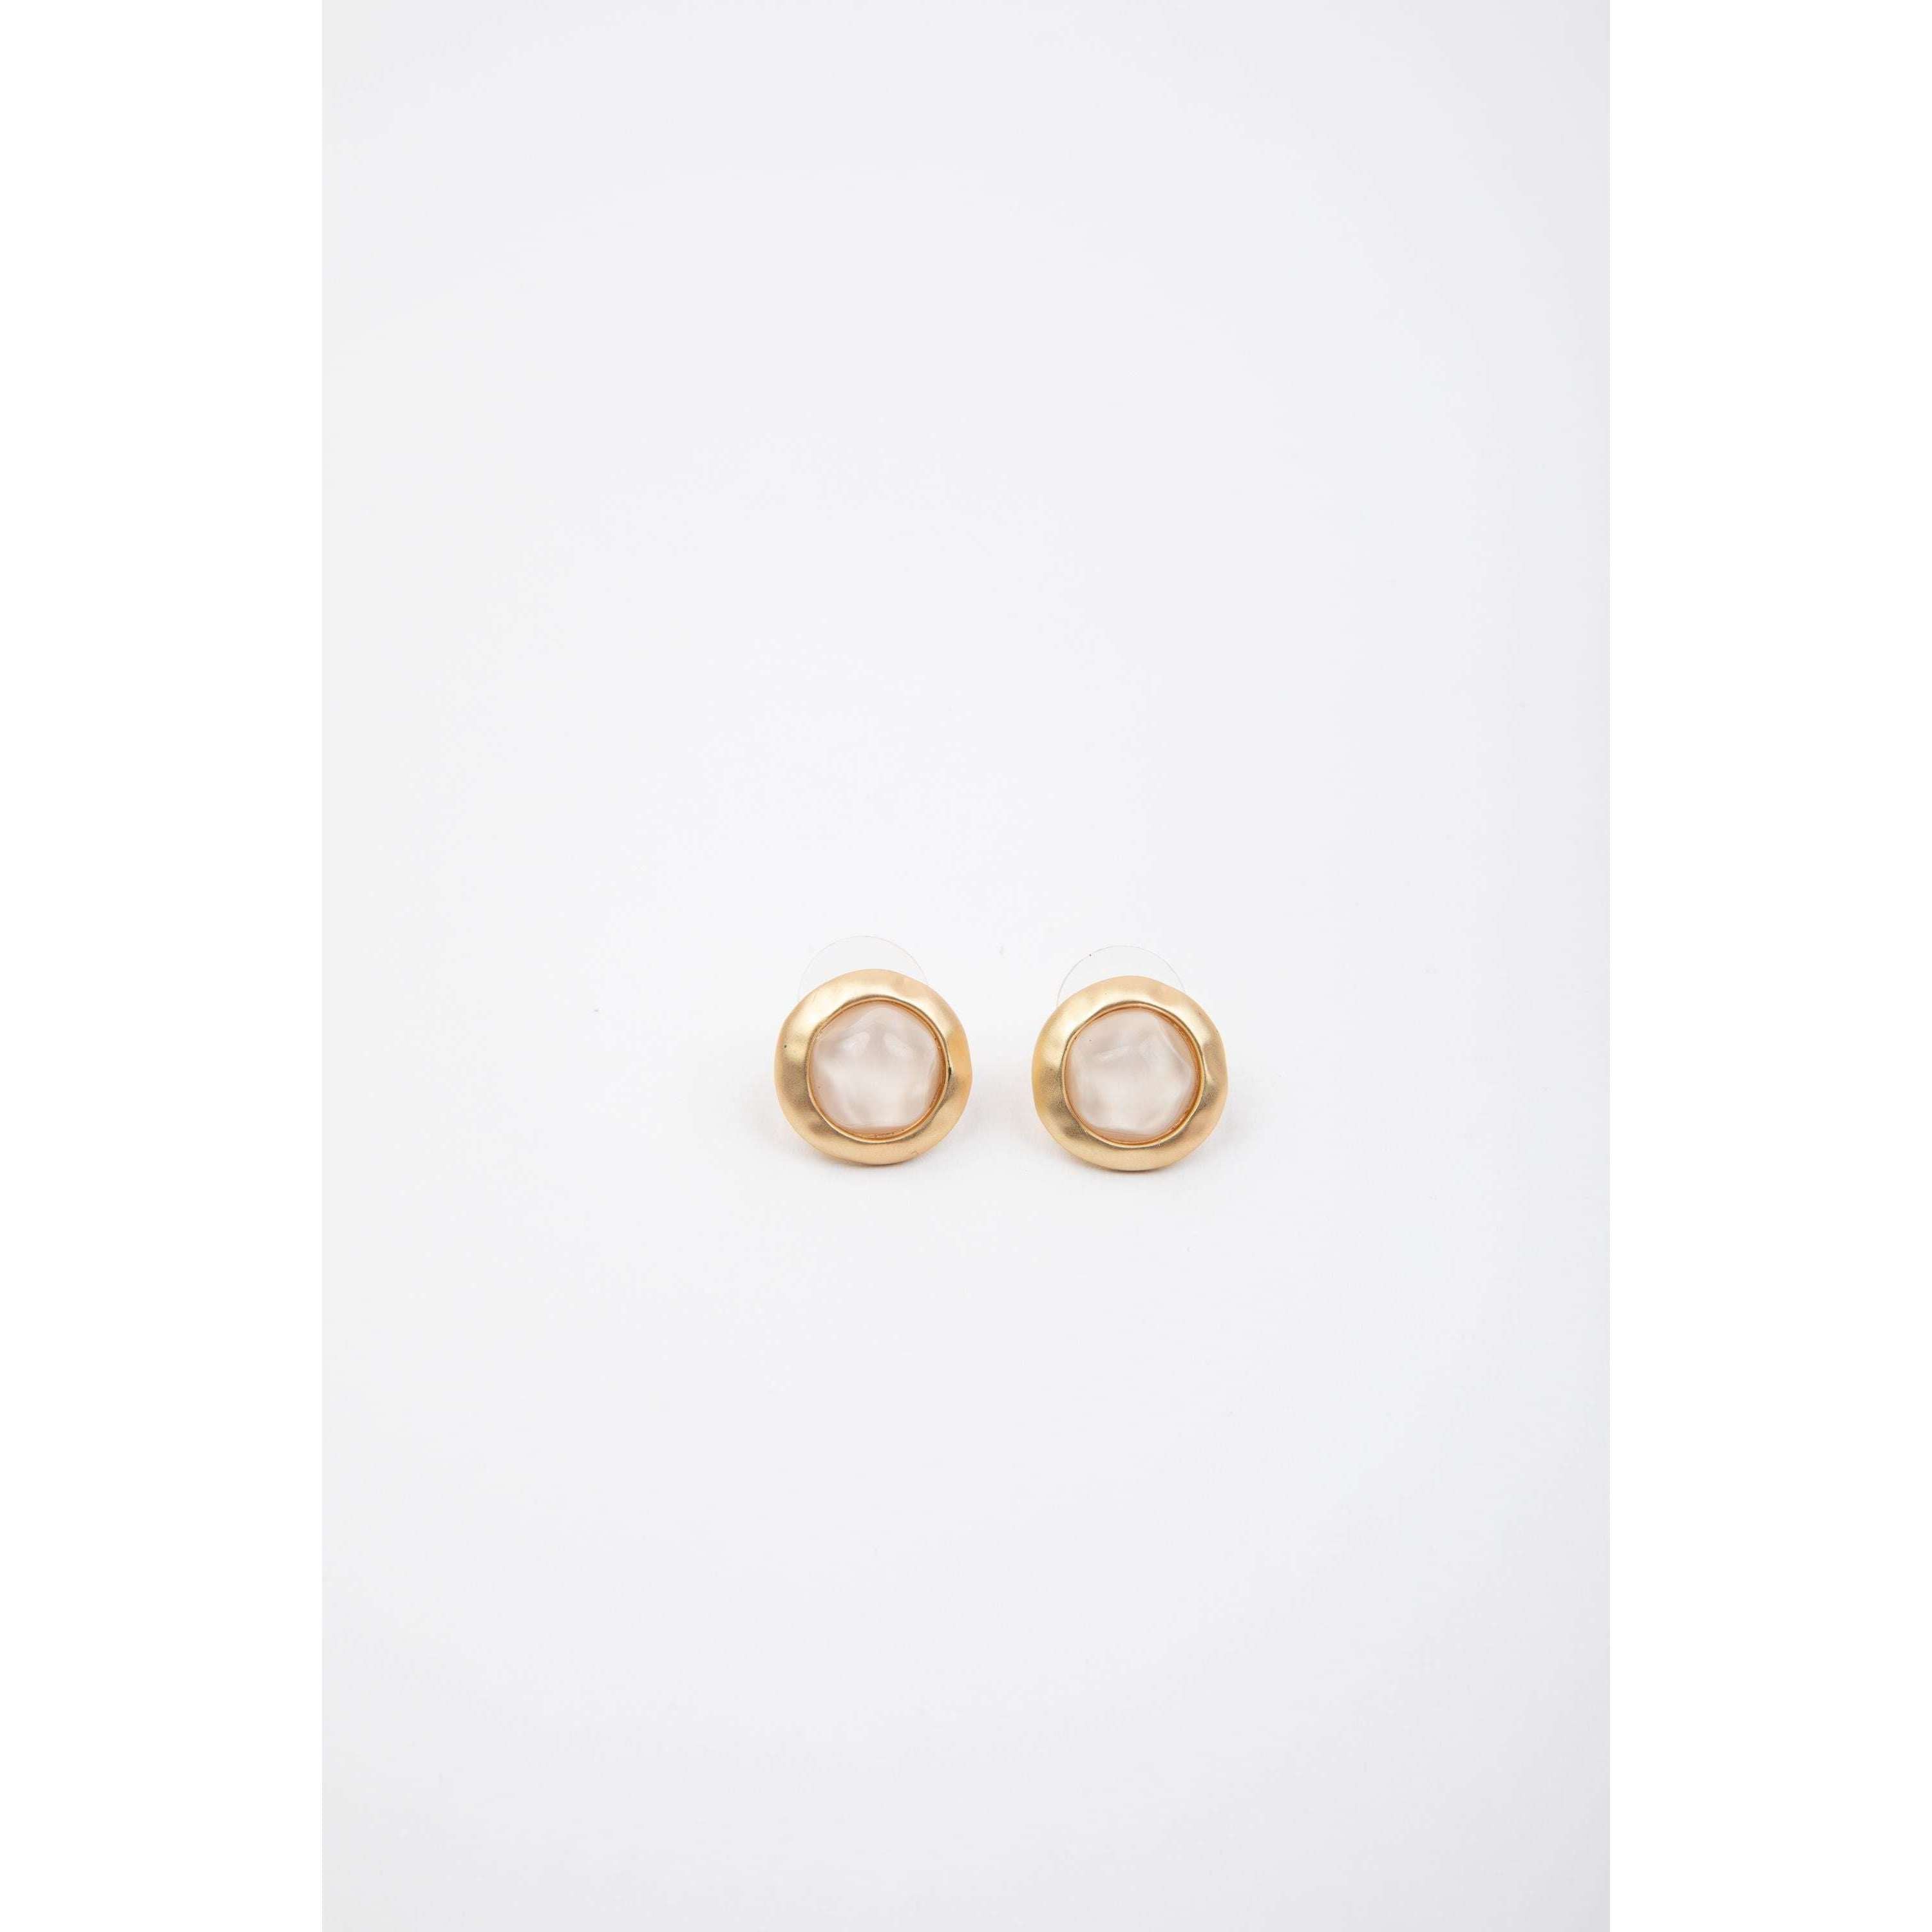 Impodimo Living & Giving:Cara Earrings:Holiday Trading & Co:White